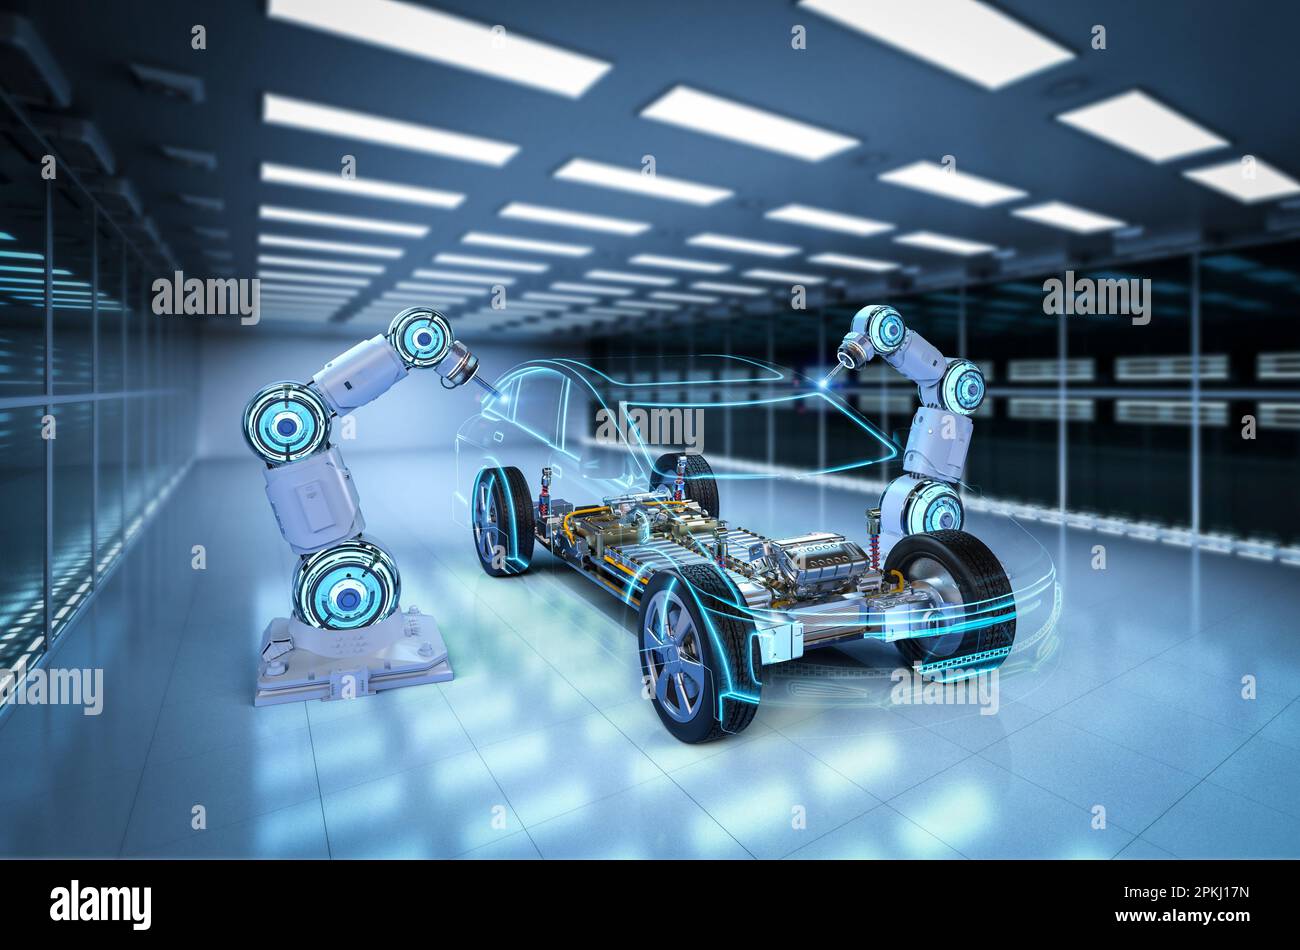 Automation automobile factory concept with 3d rendering robot assembly line with electric car battery cells module on platform Stock Photo